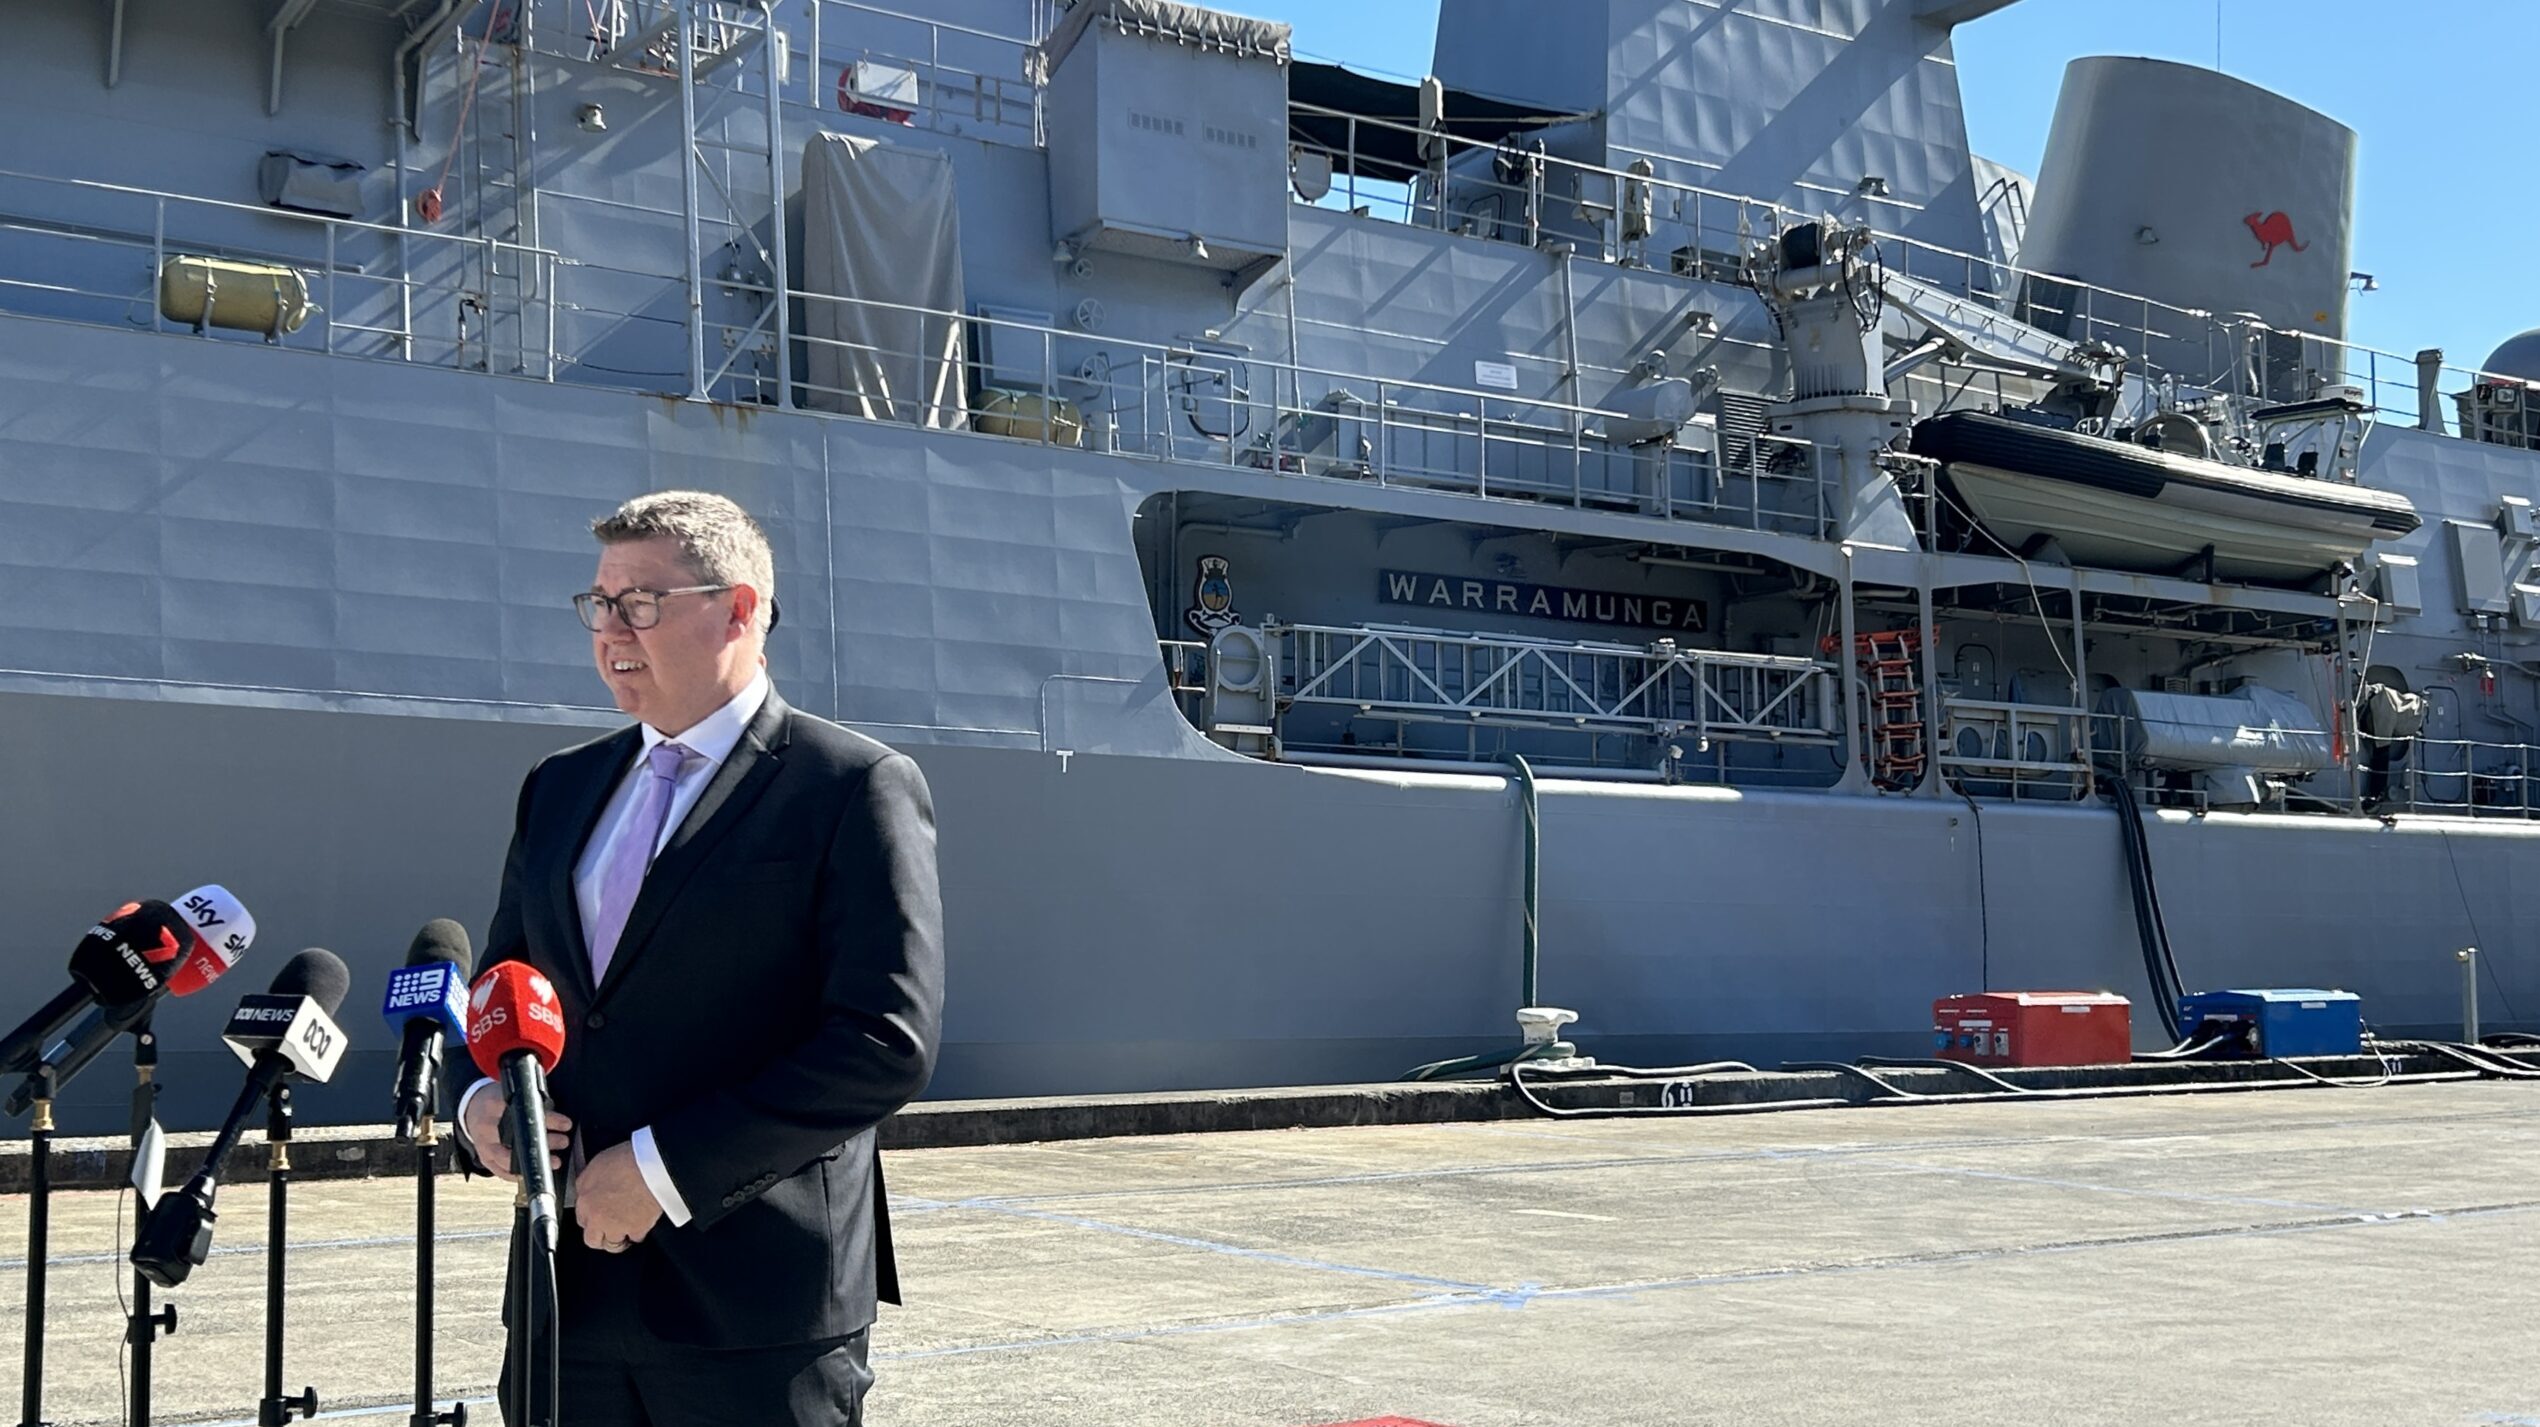 Pat Conroy, Australian defense industry minister, takes press questions about long-range missile purchases in front of HMAS Warramunga, berthed in Sydney